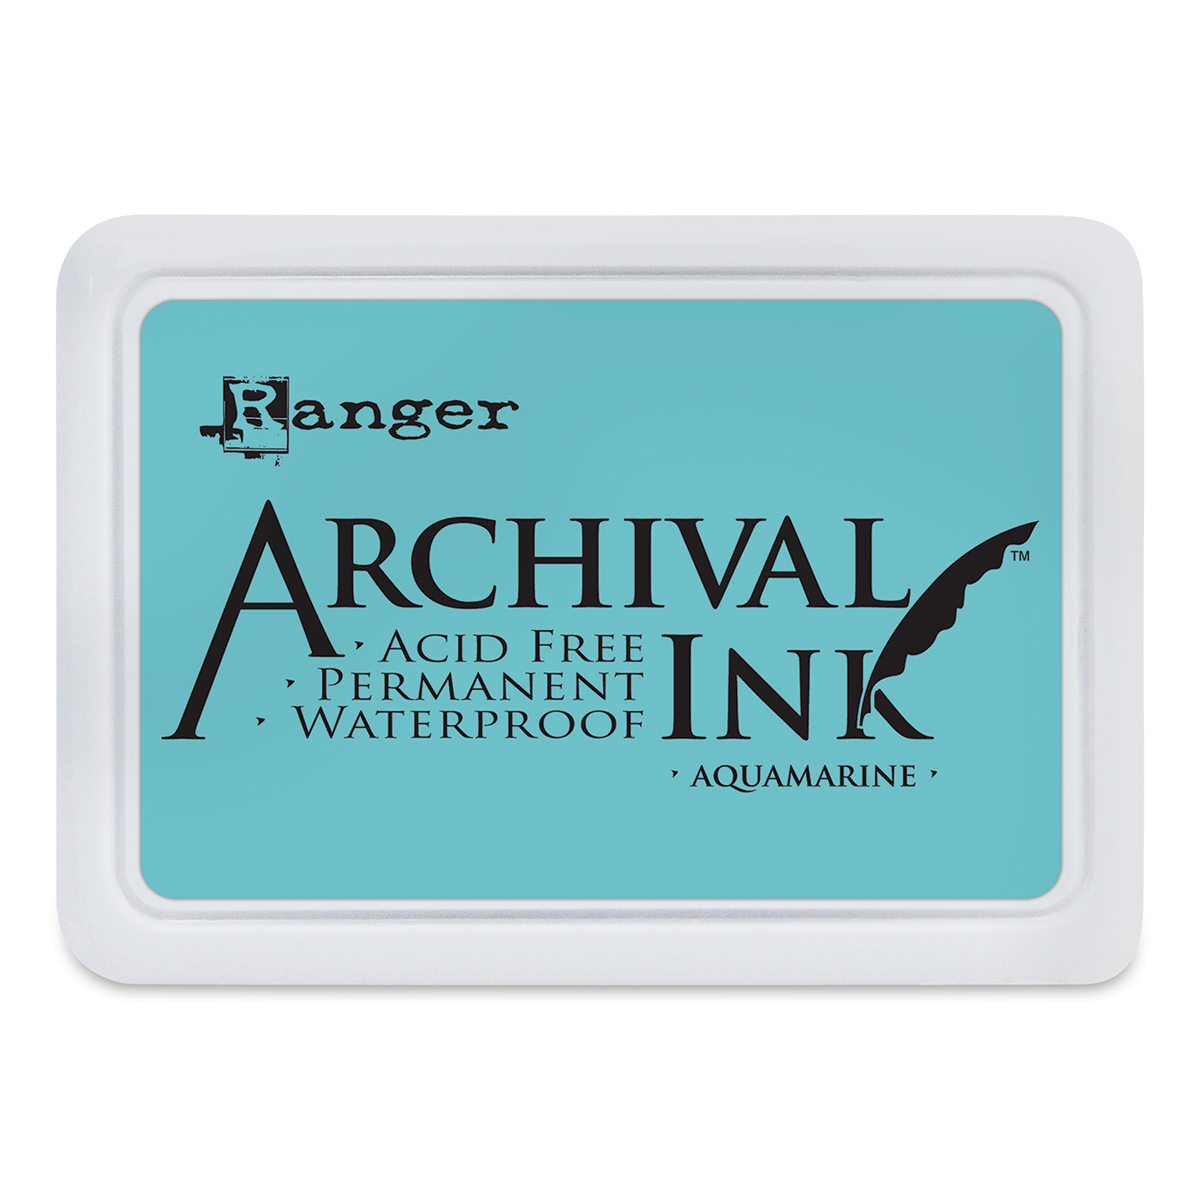 Ranger Library Green Archival Ink Pad